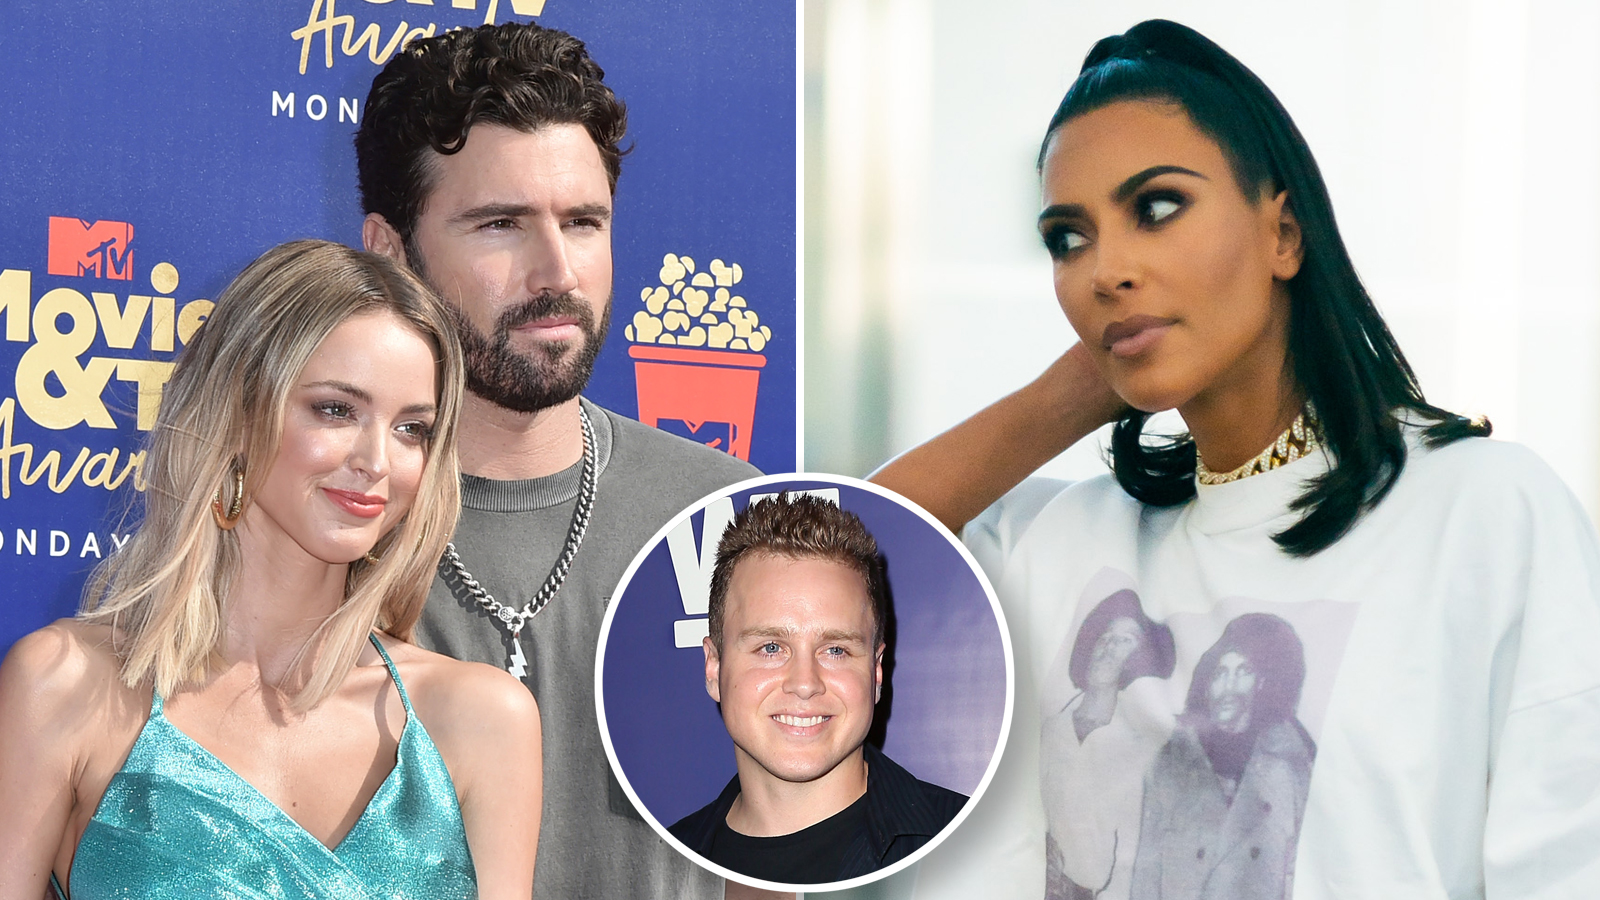 Spencer Pratt Claims Brody Jenners Wife Caused Rift With Kim K